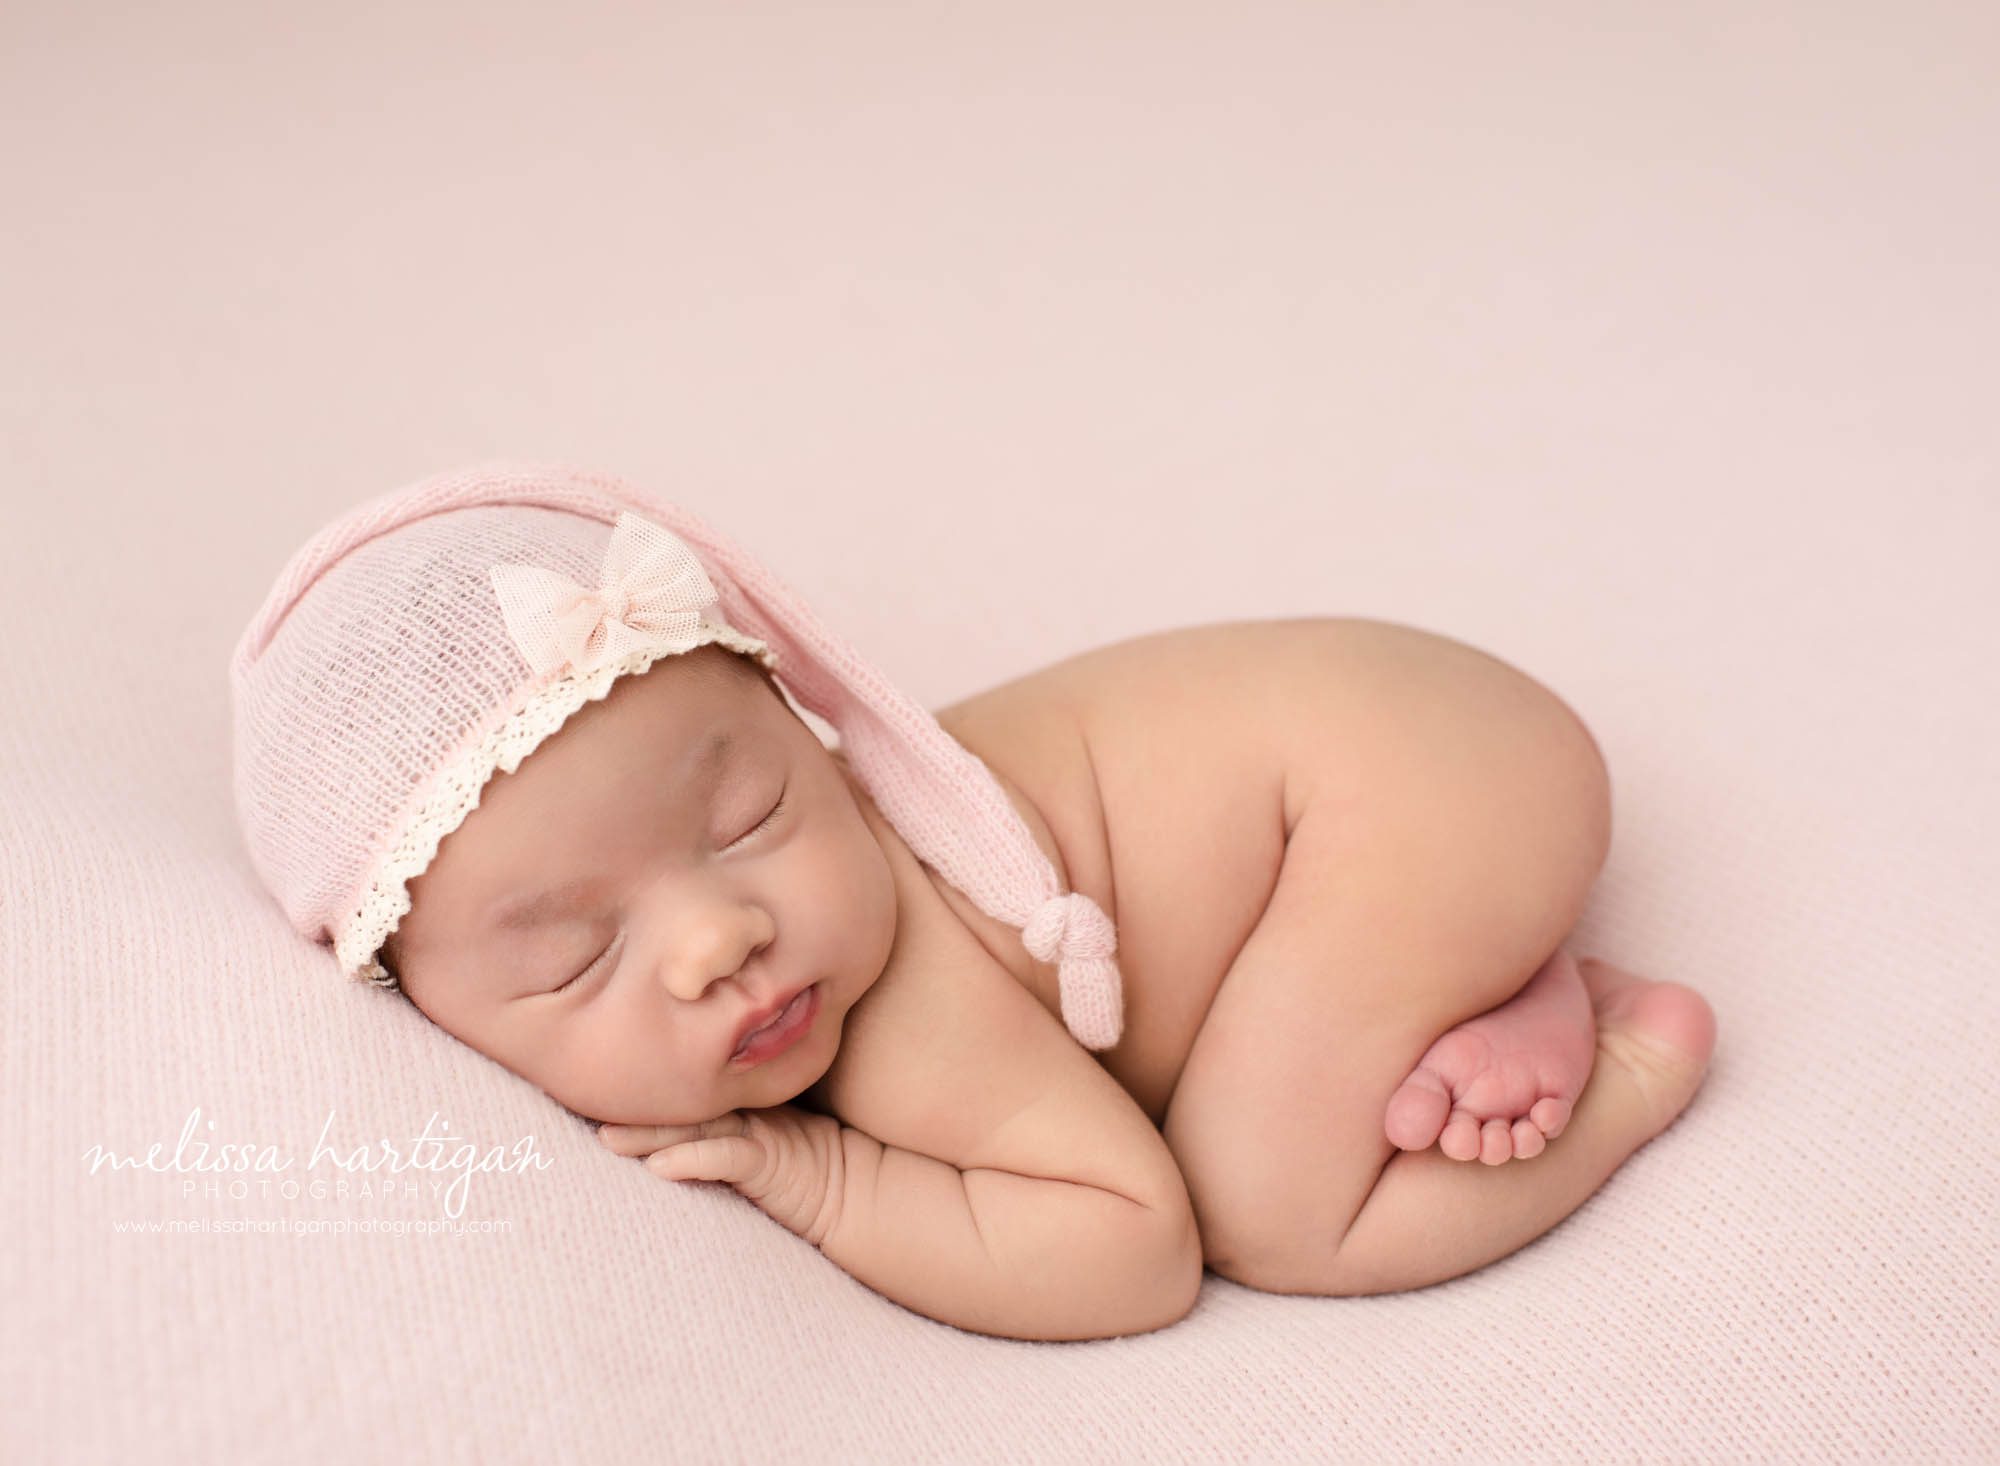 newborn baby girl posed on tummy bump up wearing pink knit sleepy cap with lace detail and bow east hartford newborn photography